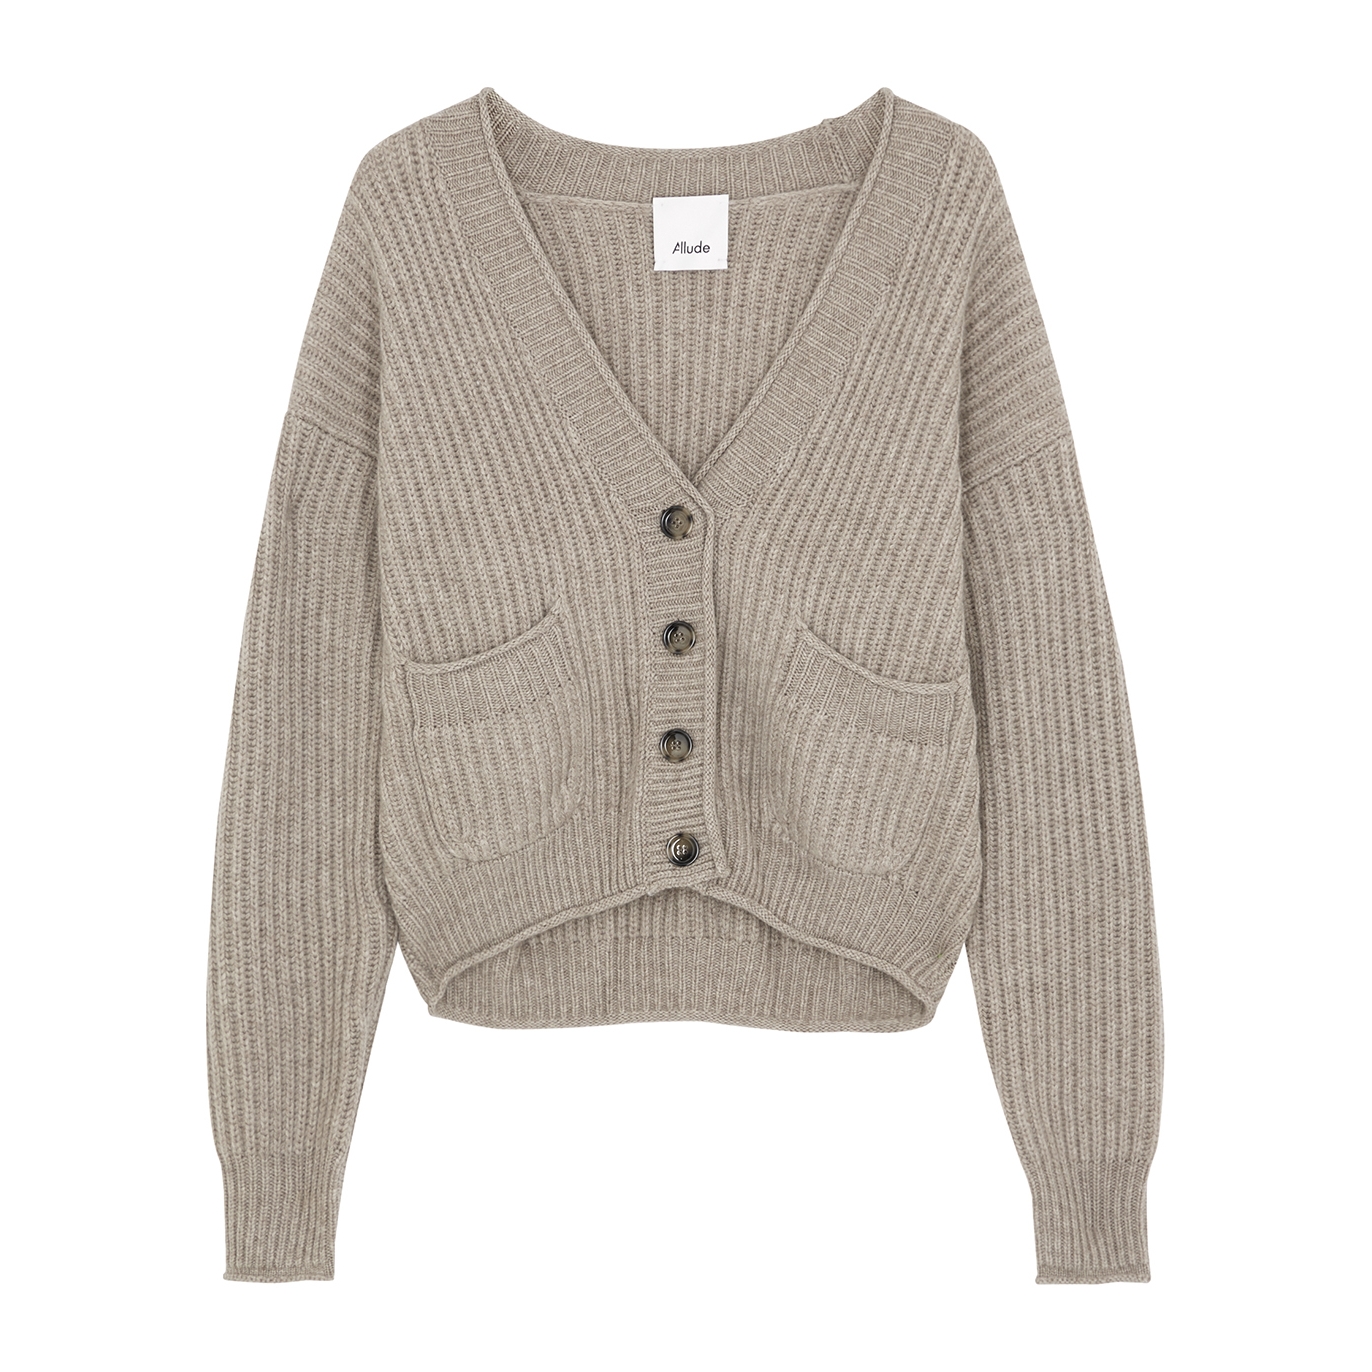 Allude Taupe Ribbed Cashmere Cardigan - Light Grey - M